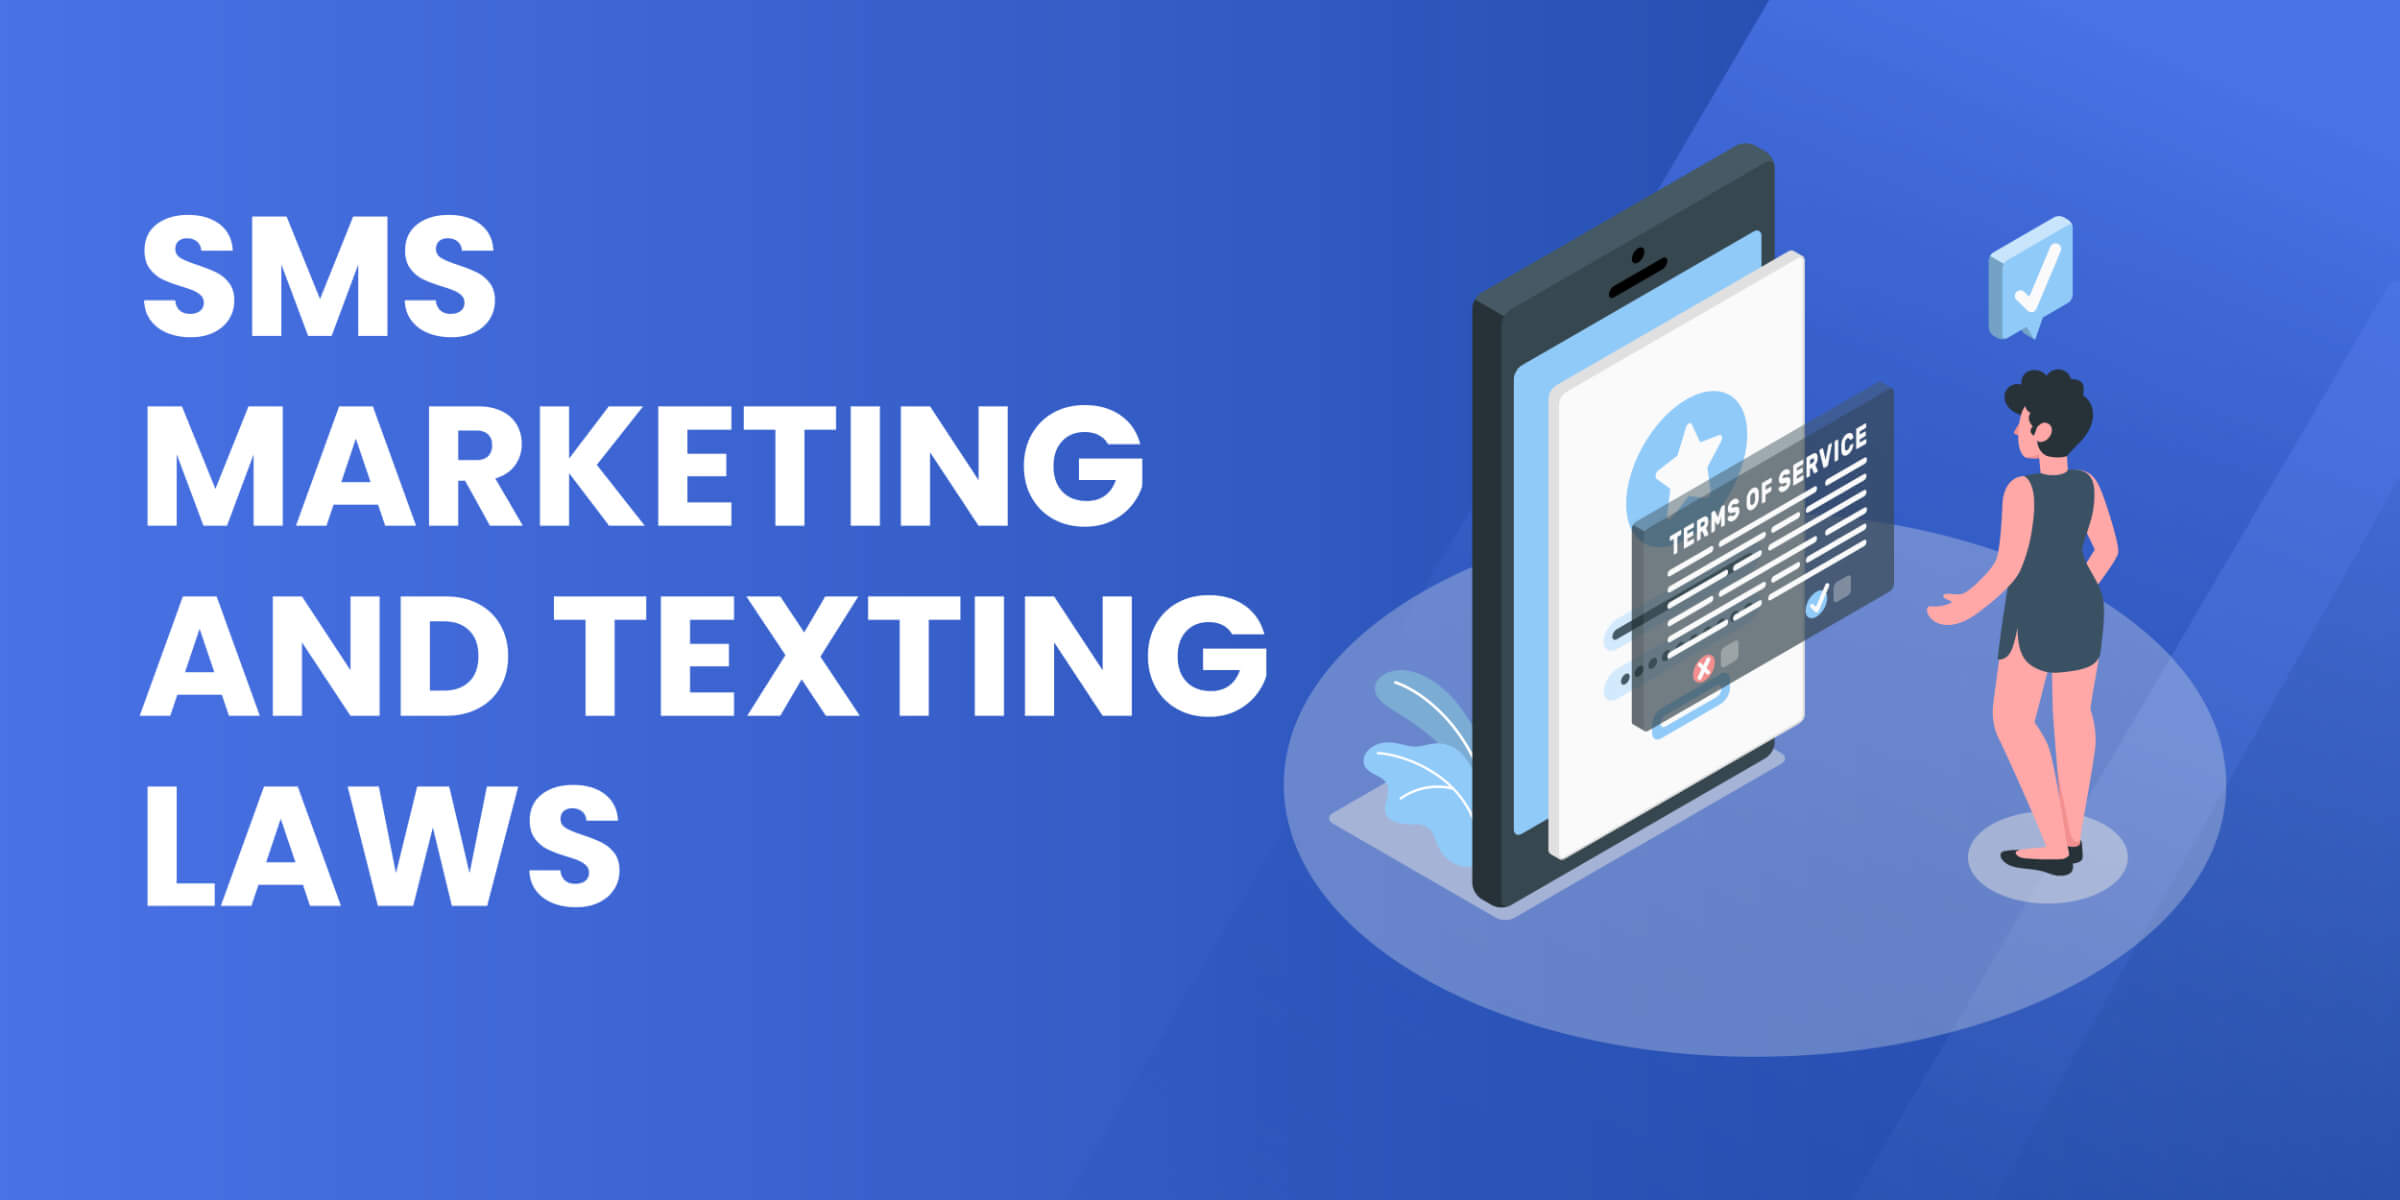 SMS Marketing and Texting Laws